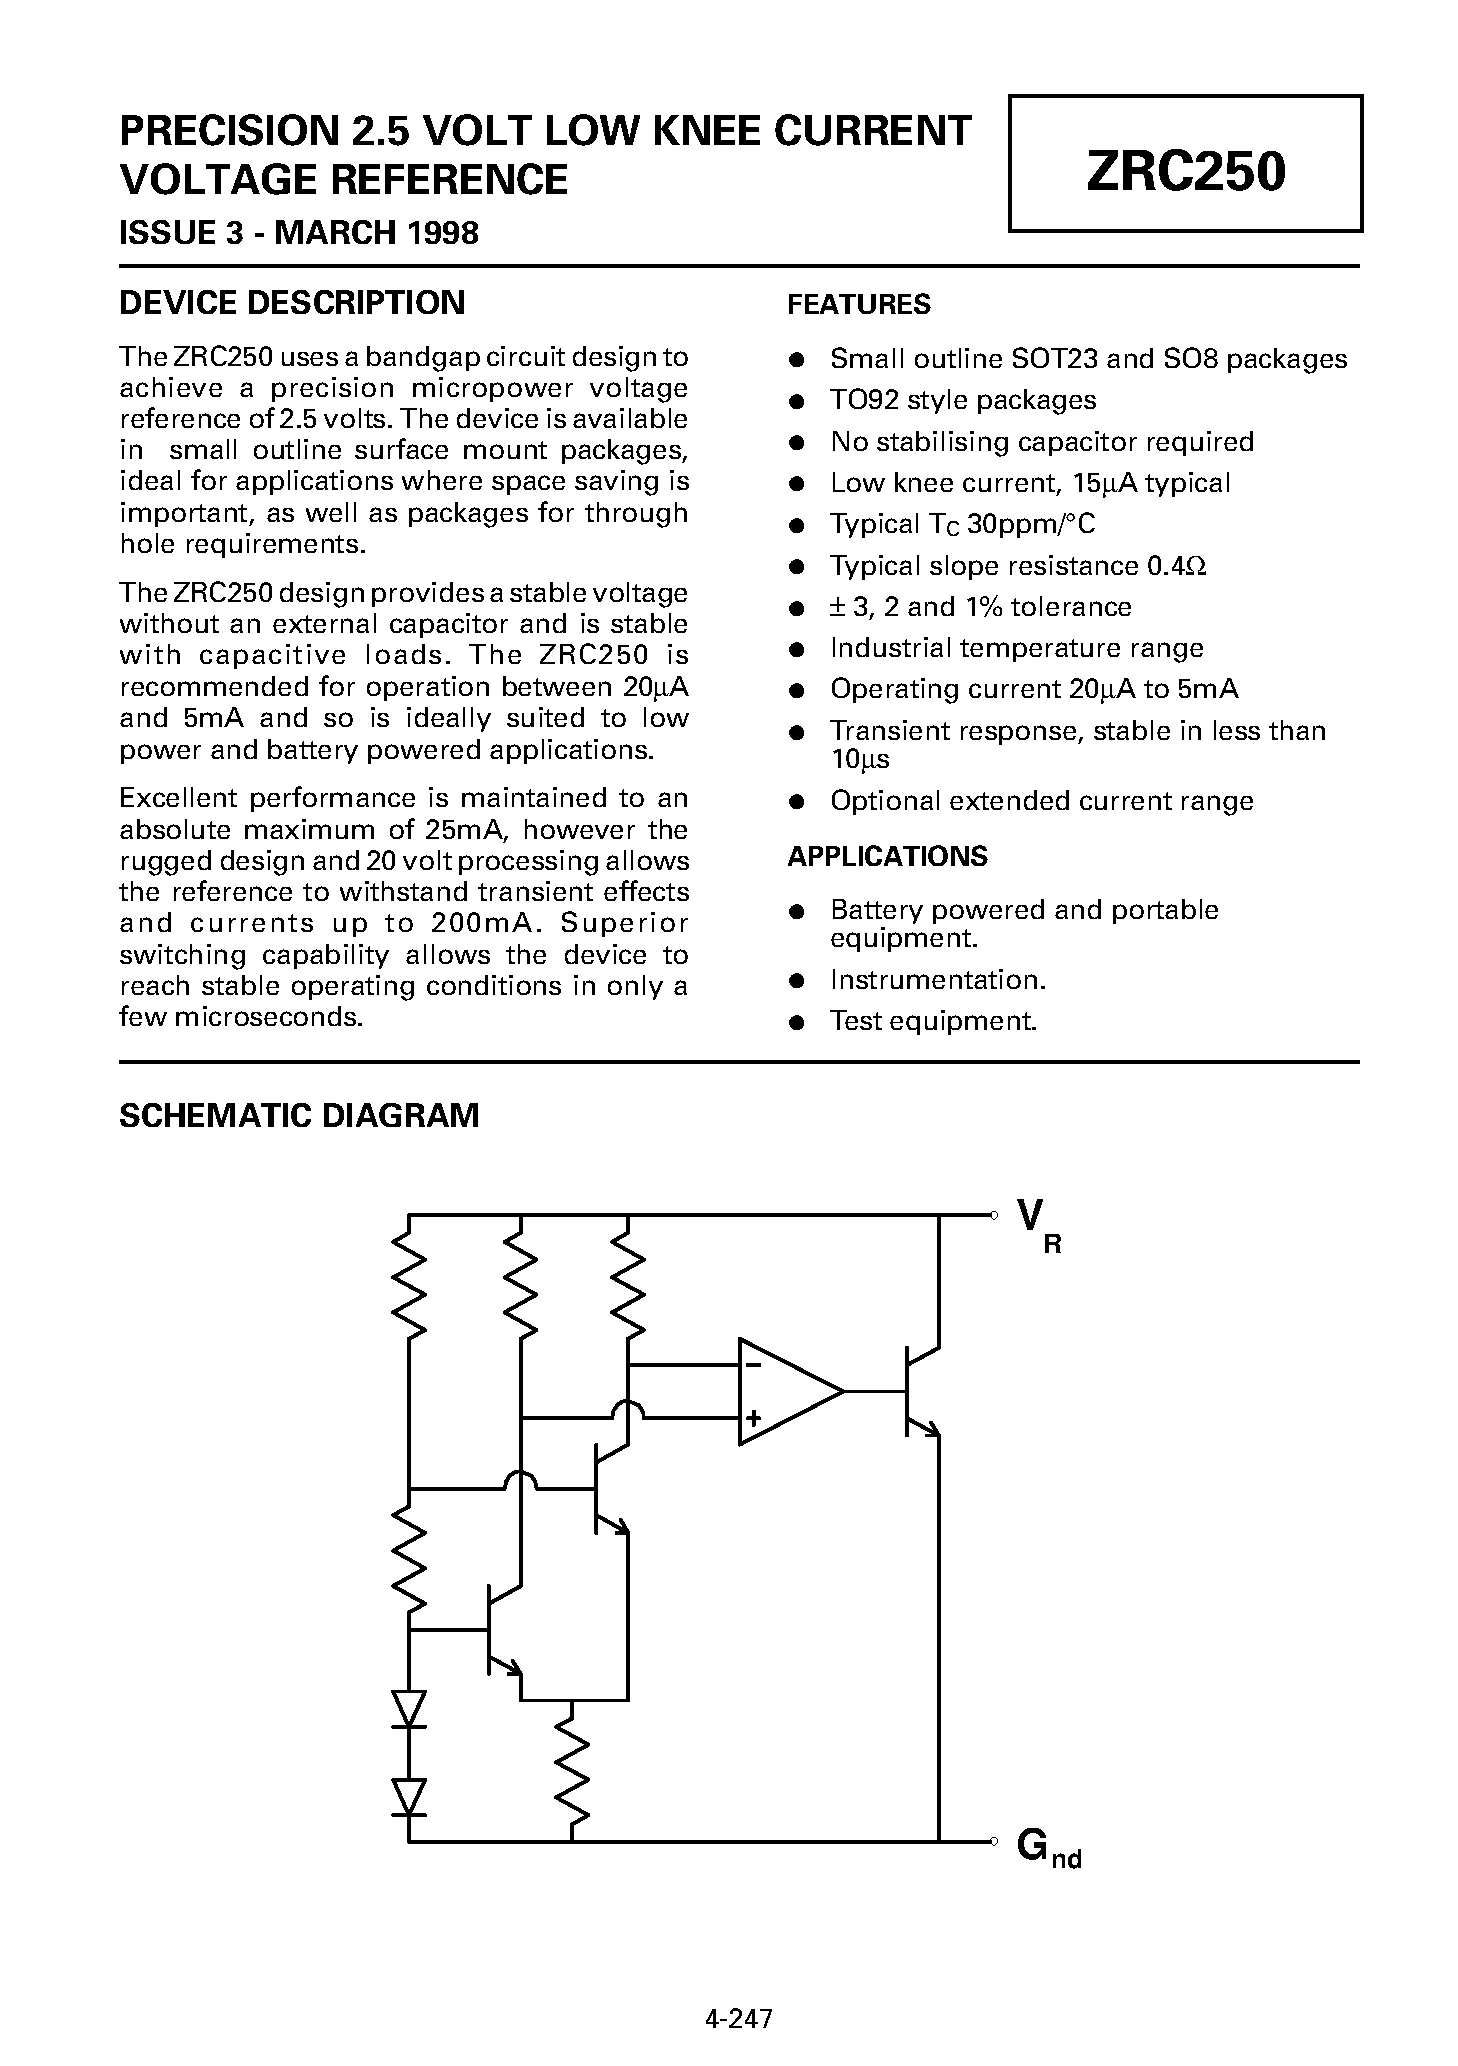 Datasheet ZRC250Y03 - PRECISION 2.5 VOLT LOW KNEE CURRENT VOLTAGE REFERENCE page 1